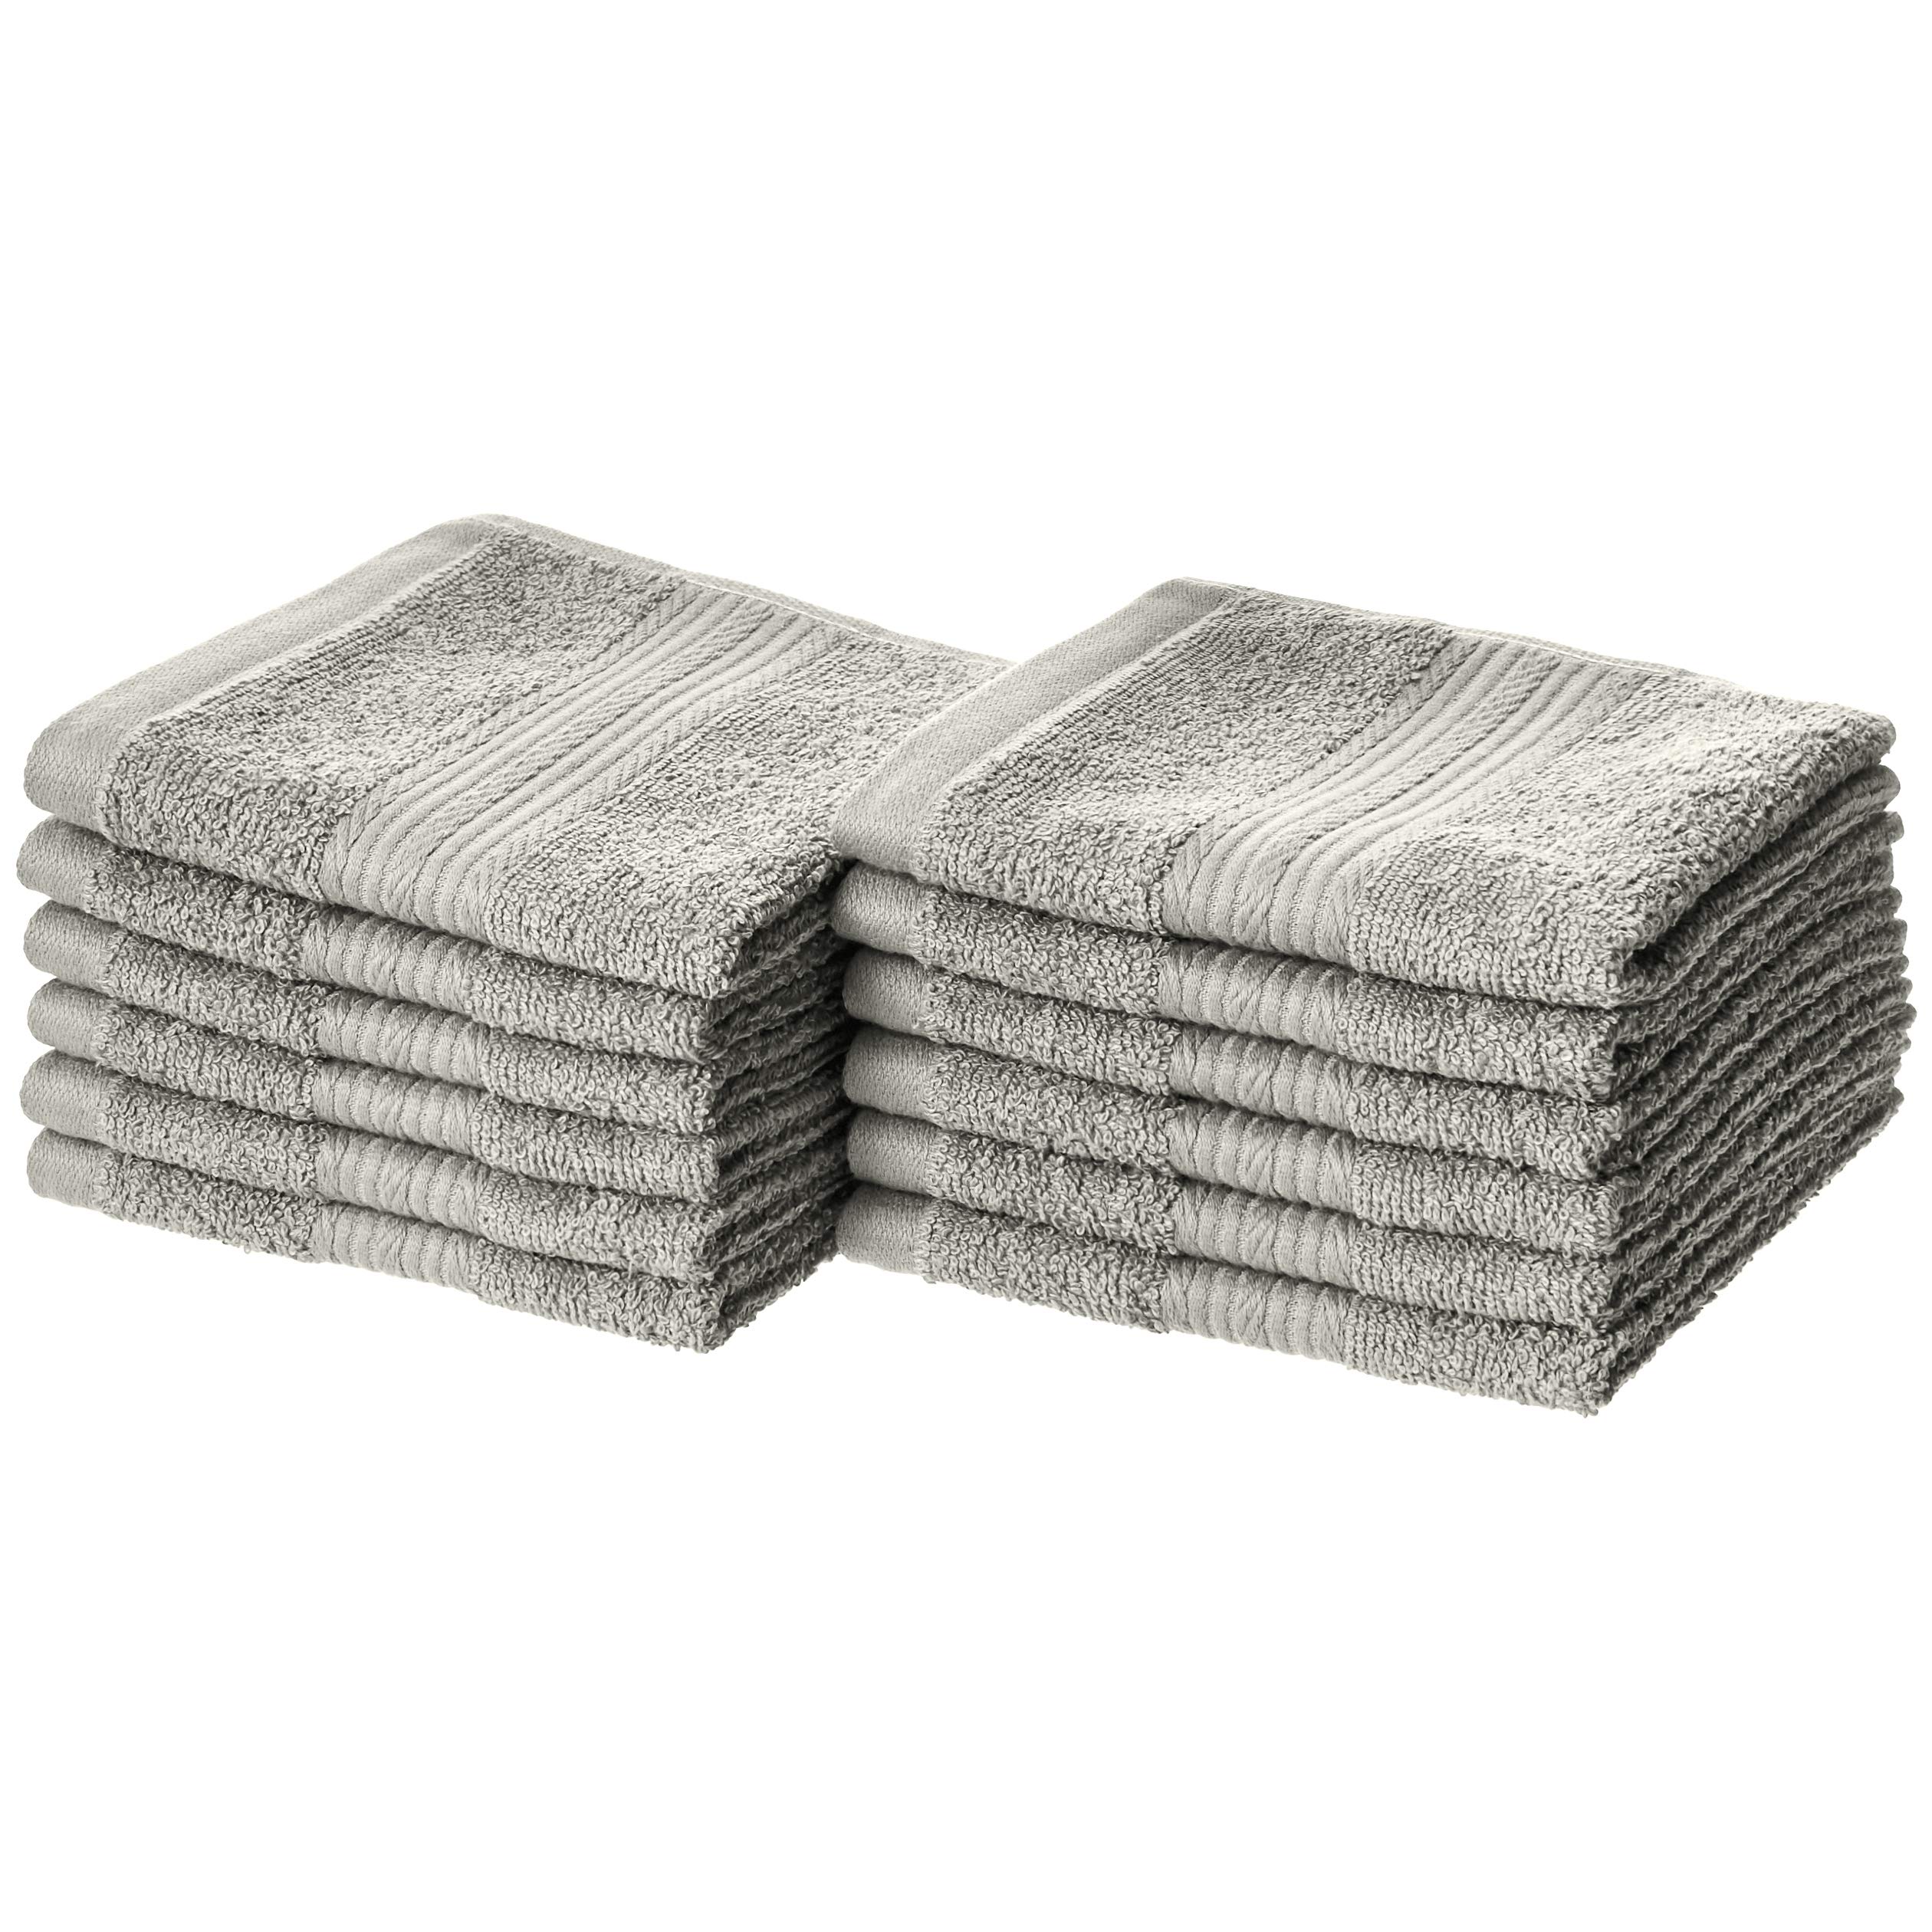 Book Cover Amazon Basics Fade-Resistant Cotton Washcloth, 12-Pack, Gray, 12